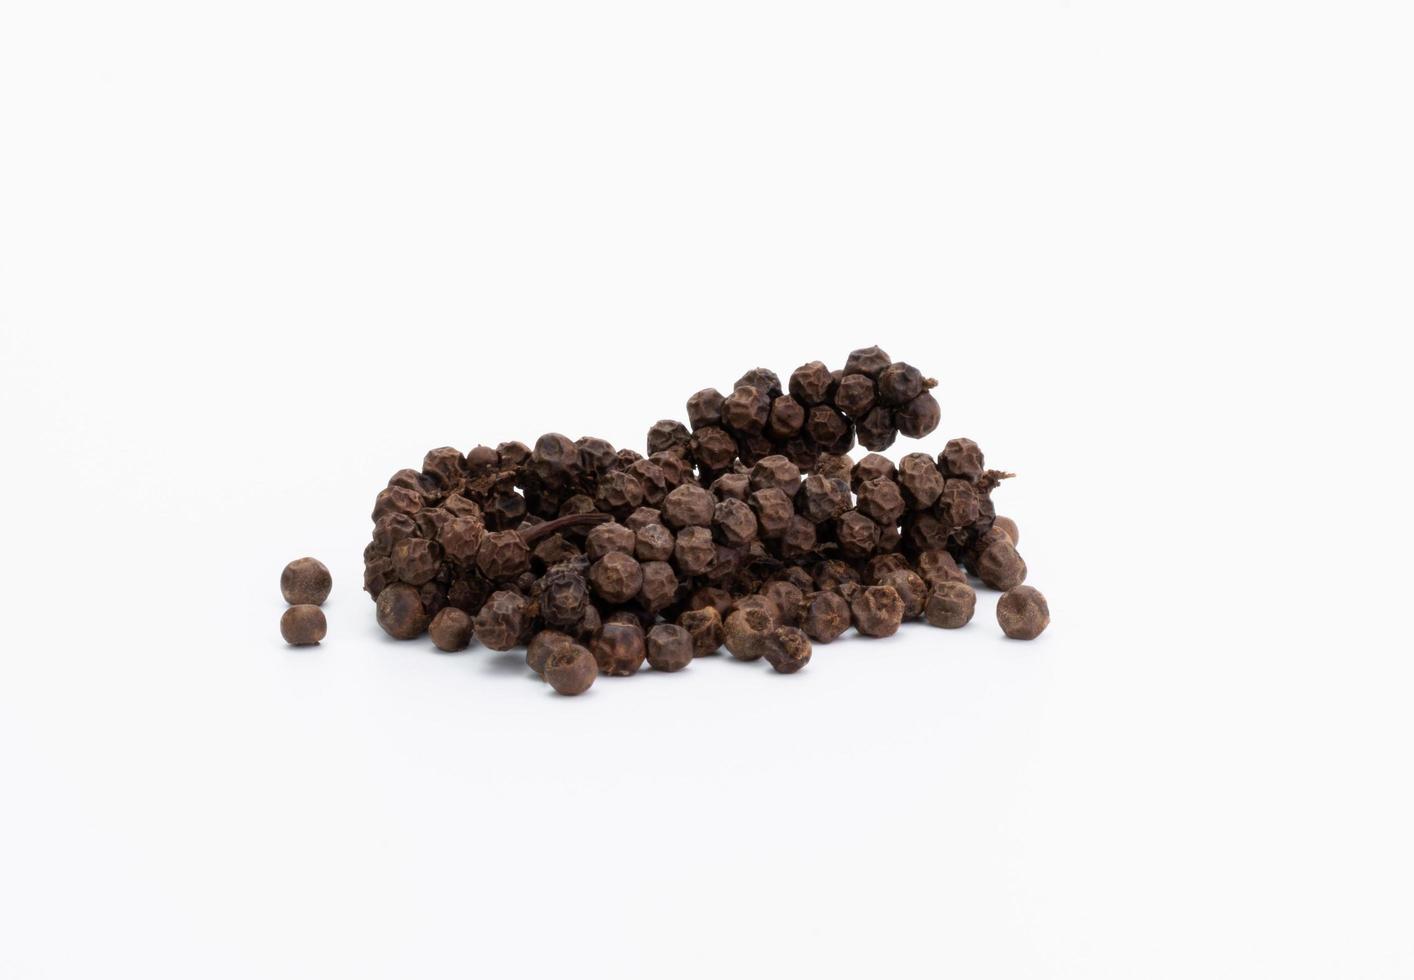 a pile of black pepper seeds food or seasoning Spices, ingredients of regular cooking in the kitchen of Asian, Indian, spicy, hot, natural herbs. pepper seeds isolated on white background photo